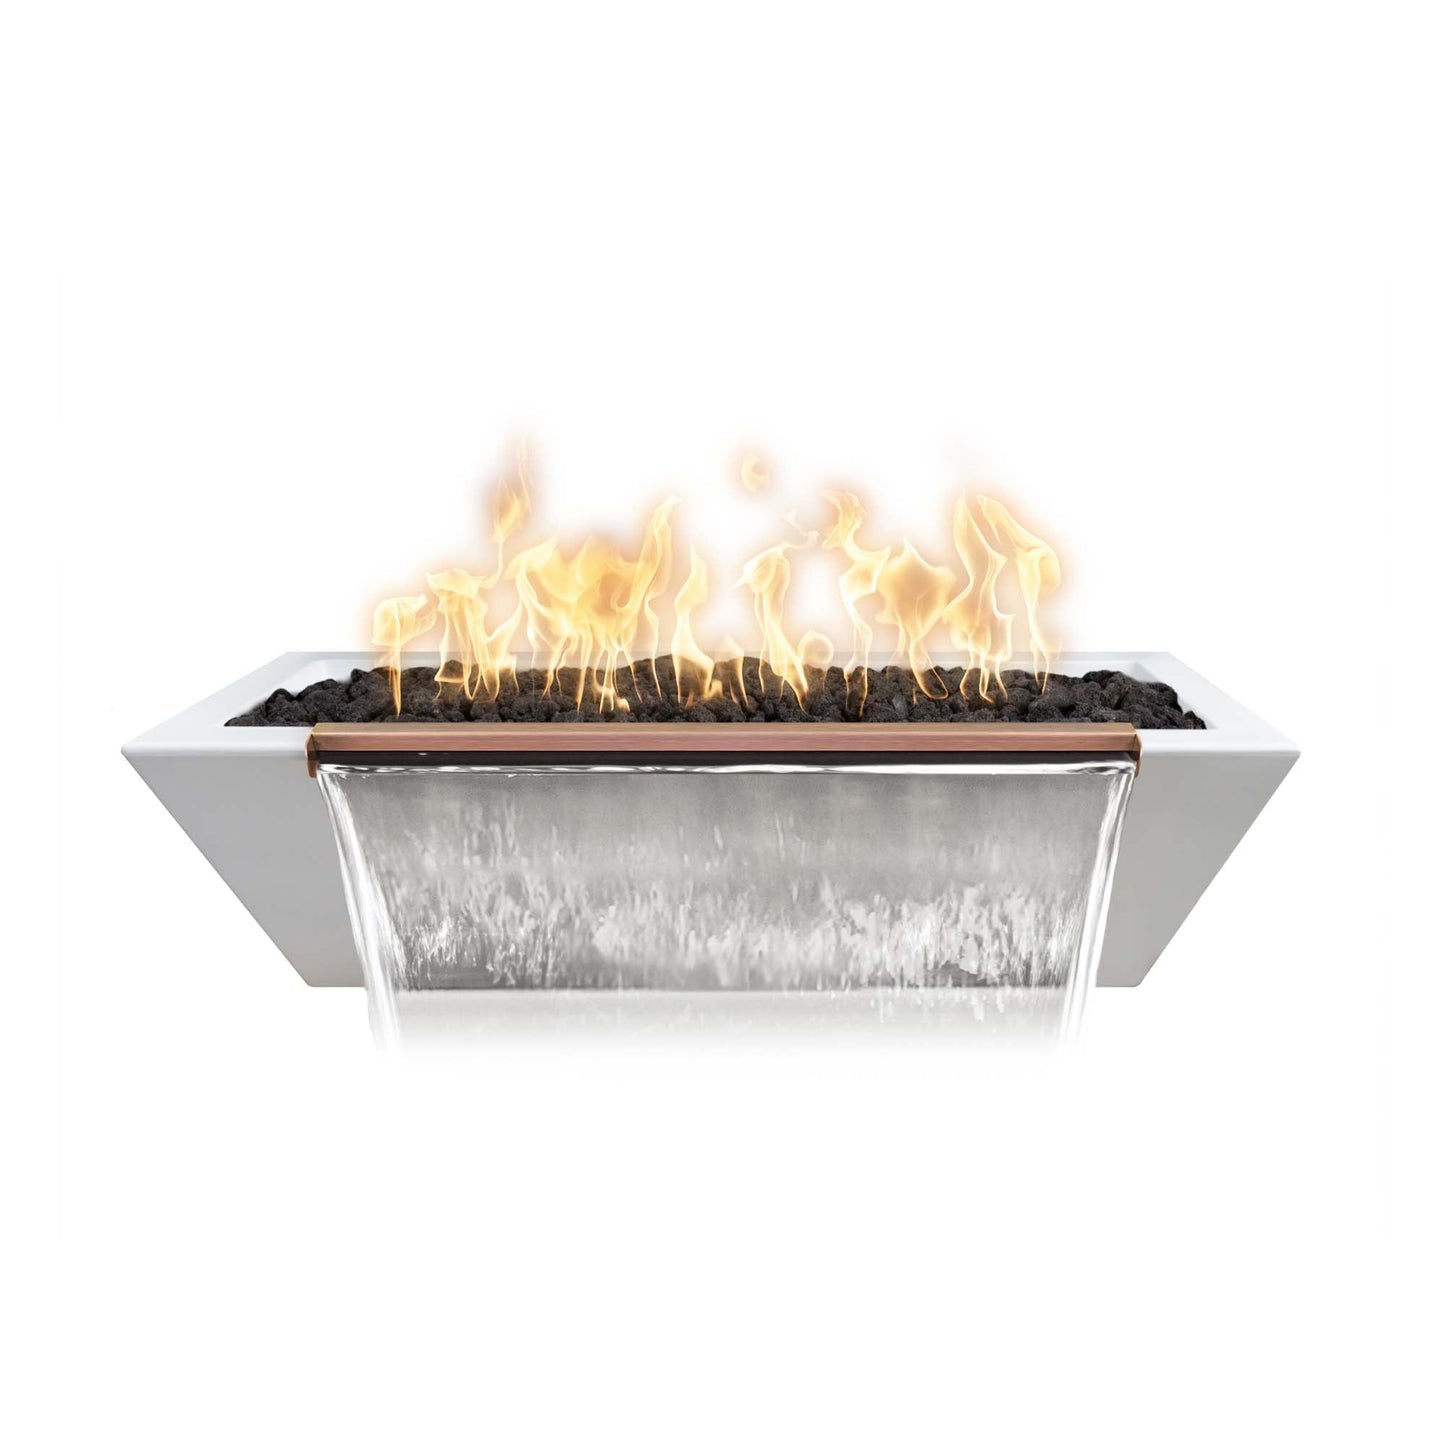 The Outdoor Plus Linear Maya 60" Metallic Copper GFRC Concrete Liquid Propane Fire & Water Bowl with 12V Electronic Ignition